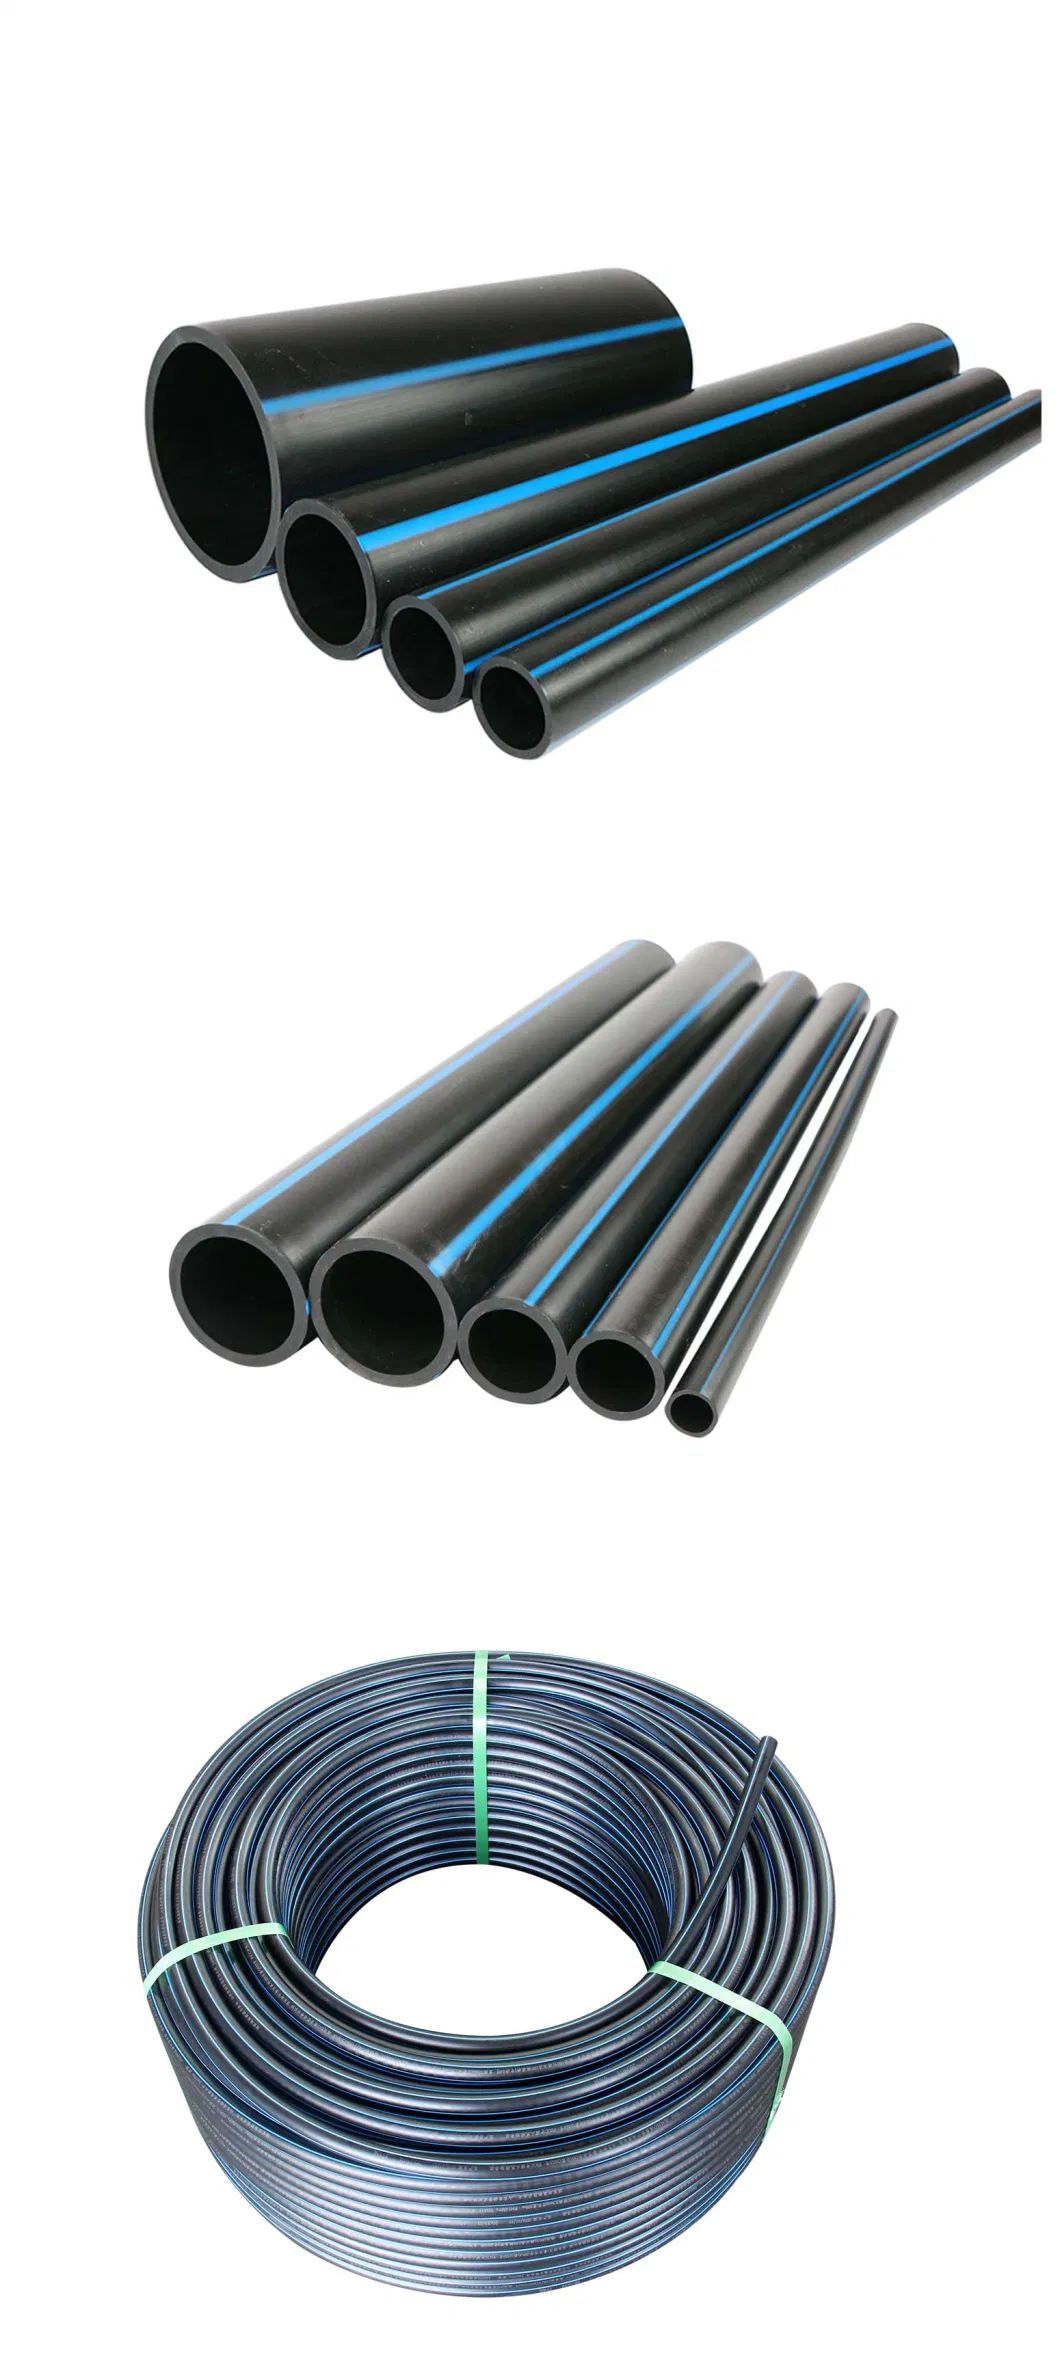 Plastic Pipe HDPE Pipe Water Pipes Pn6 SDR 21 17 13.6 11 DN200 110mm Black HDPE Wate Pipe